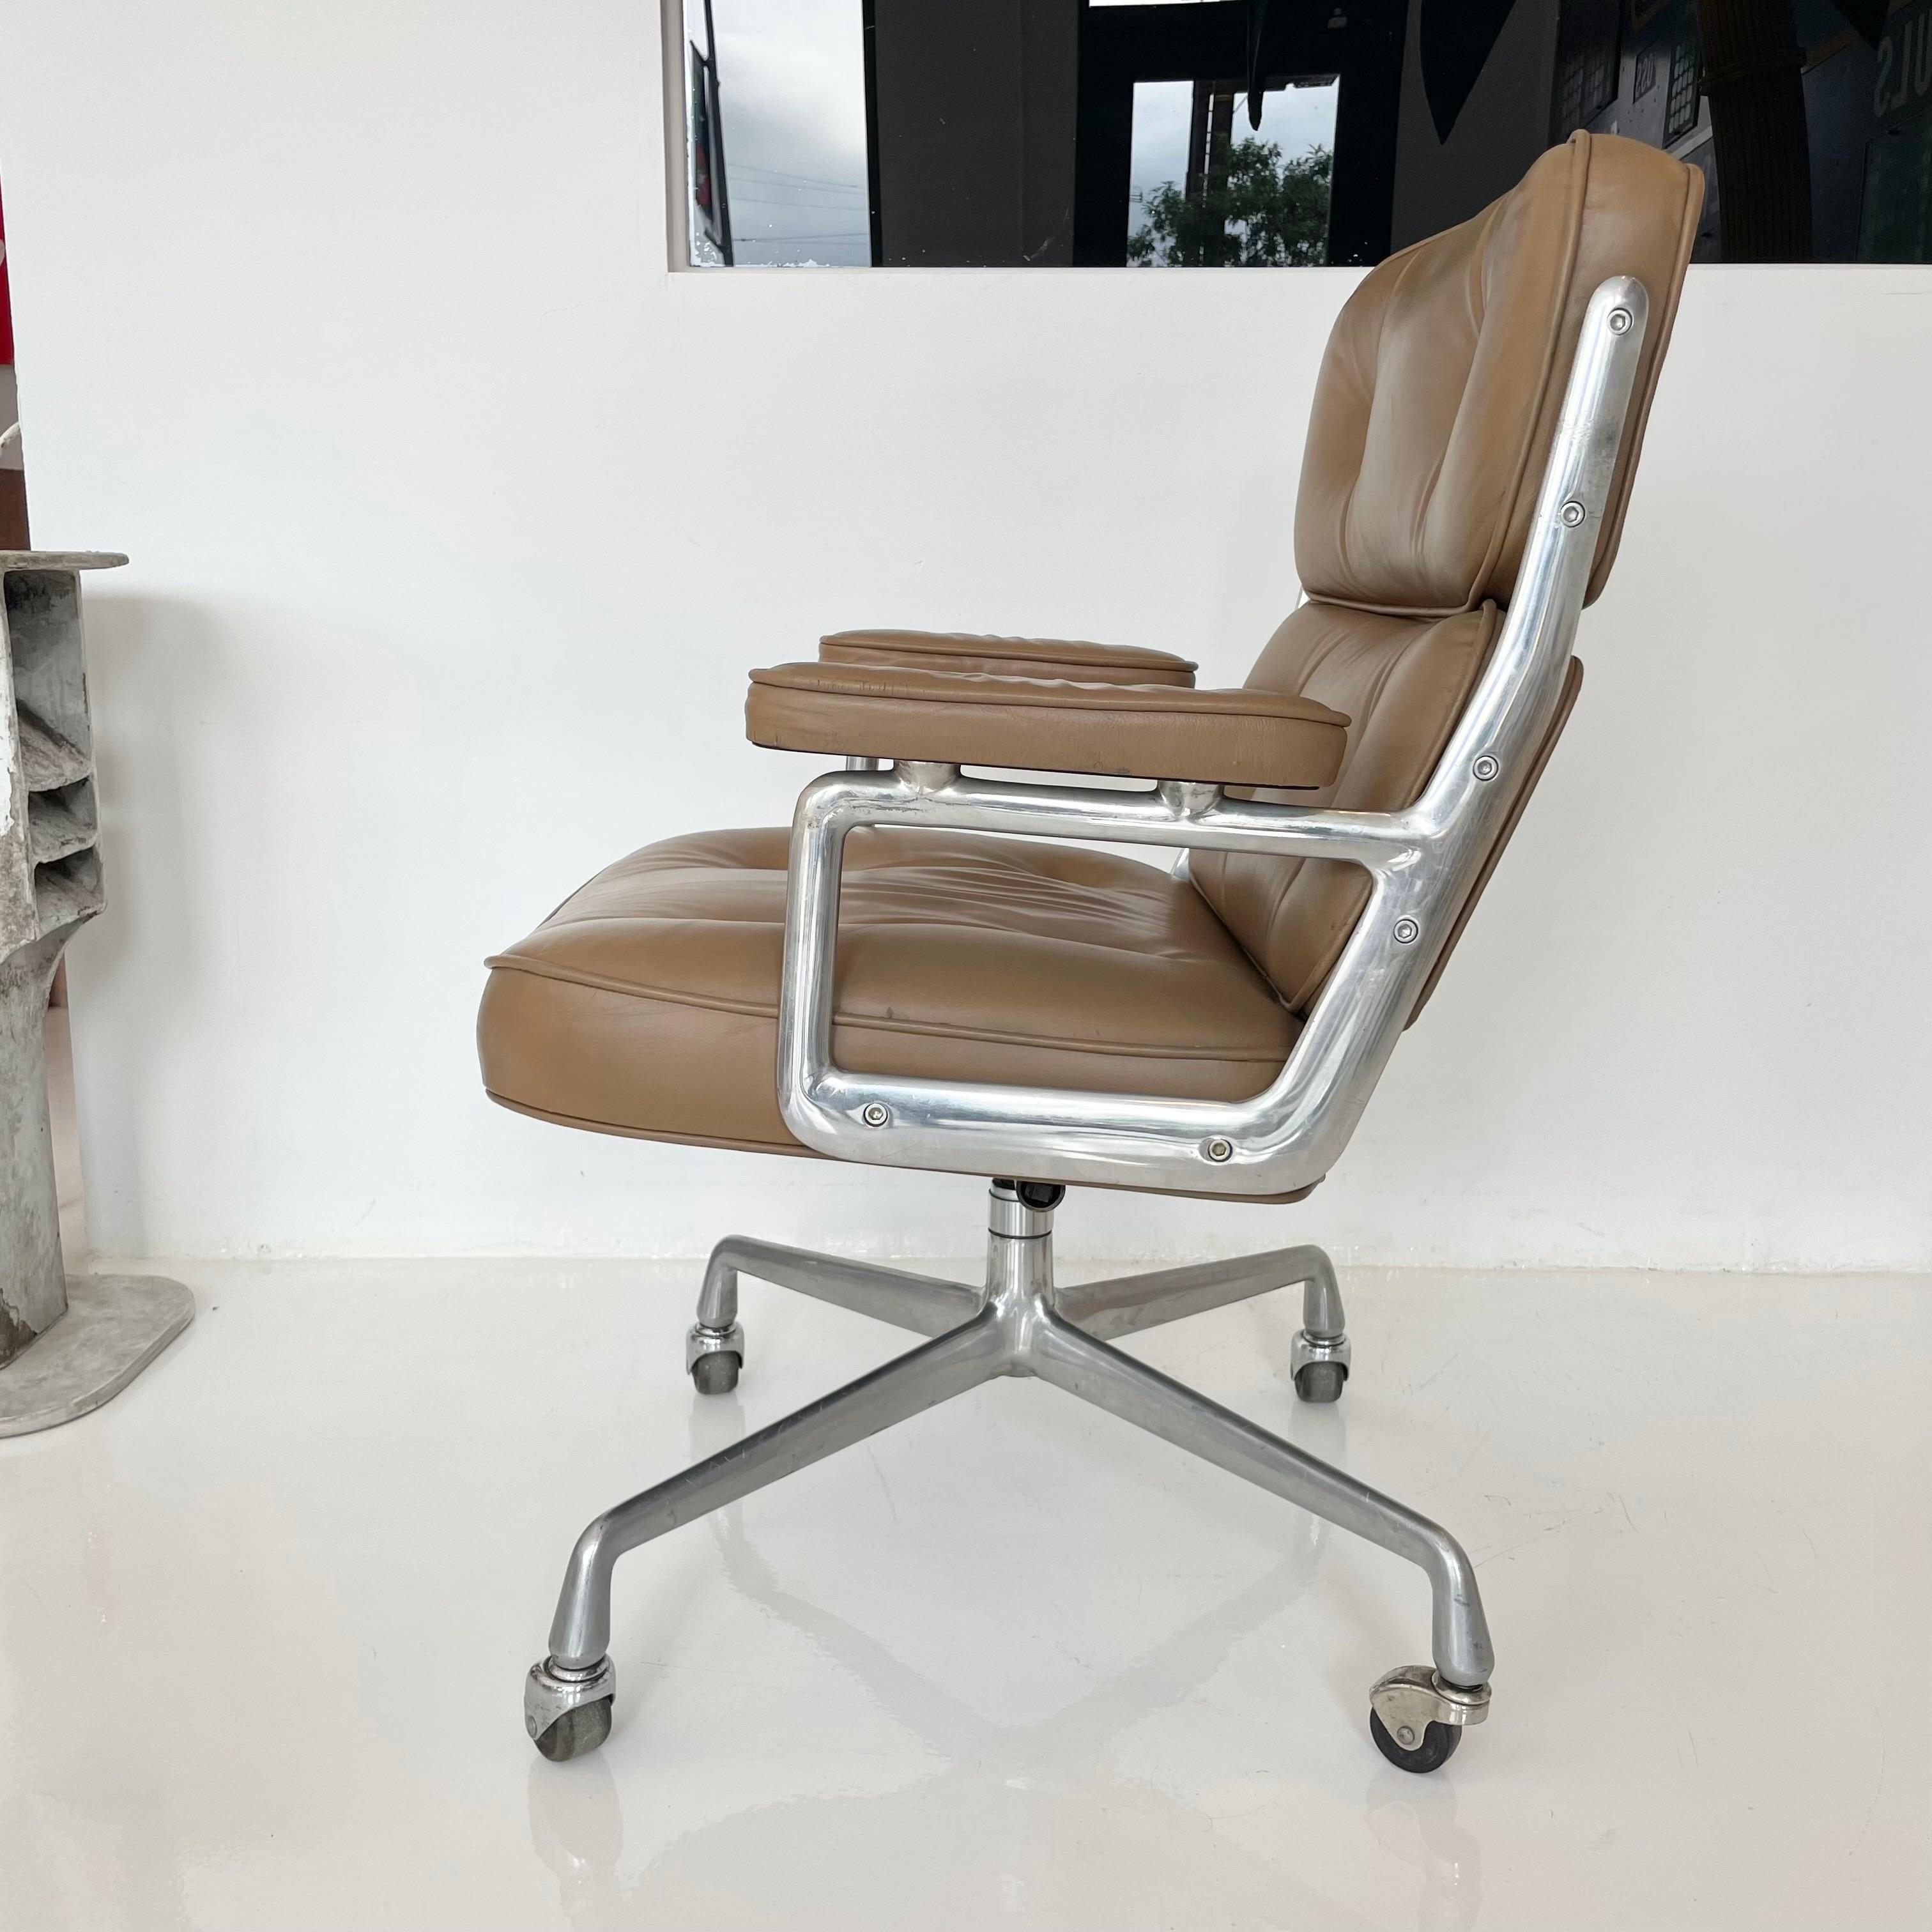 Late 20th Century Original Eames Time Life Chair in Camel Leather